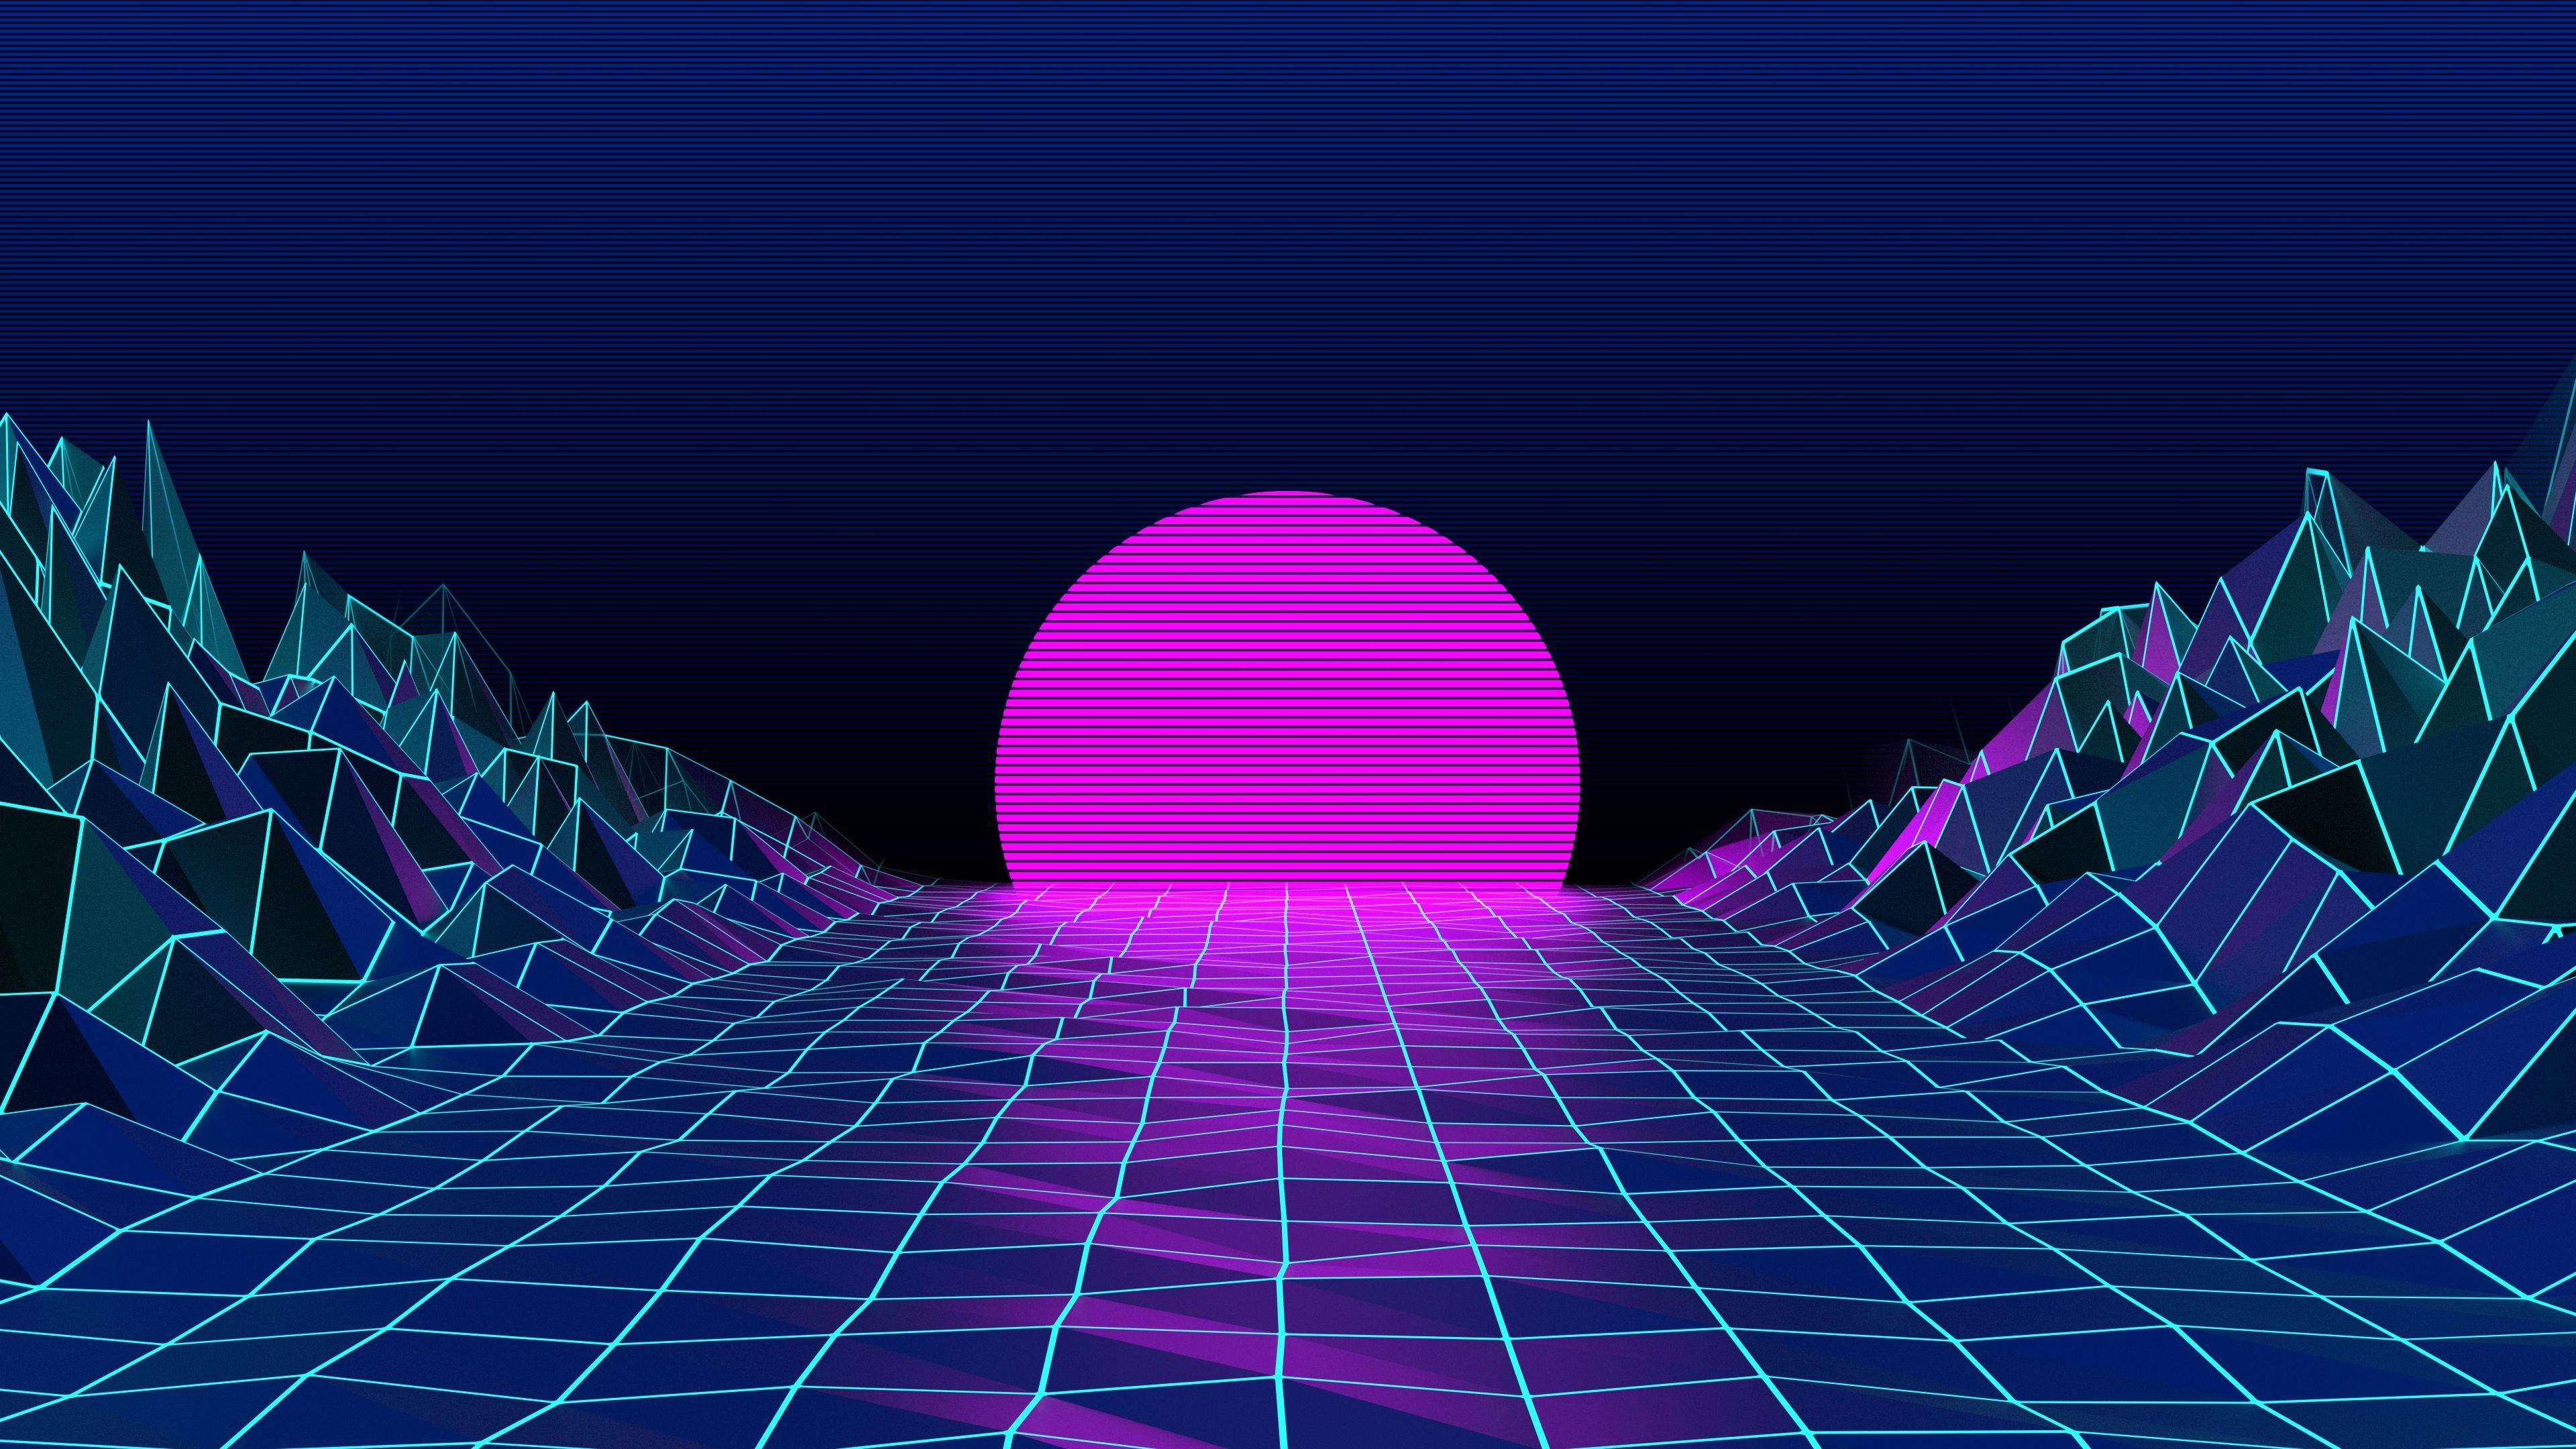 Laser Wallpaper (image in Collection)